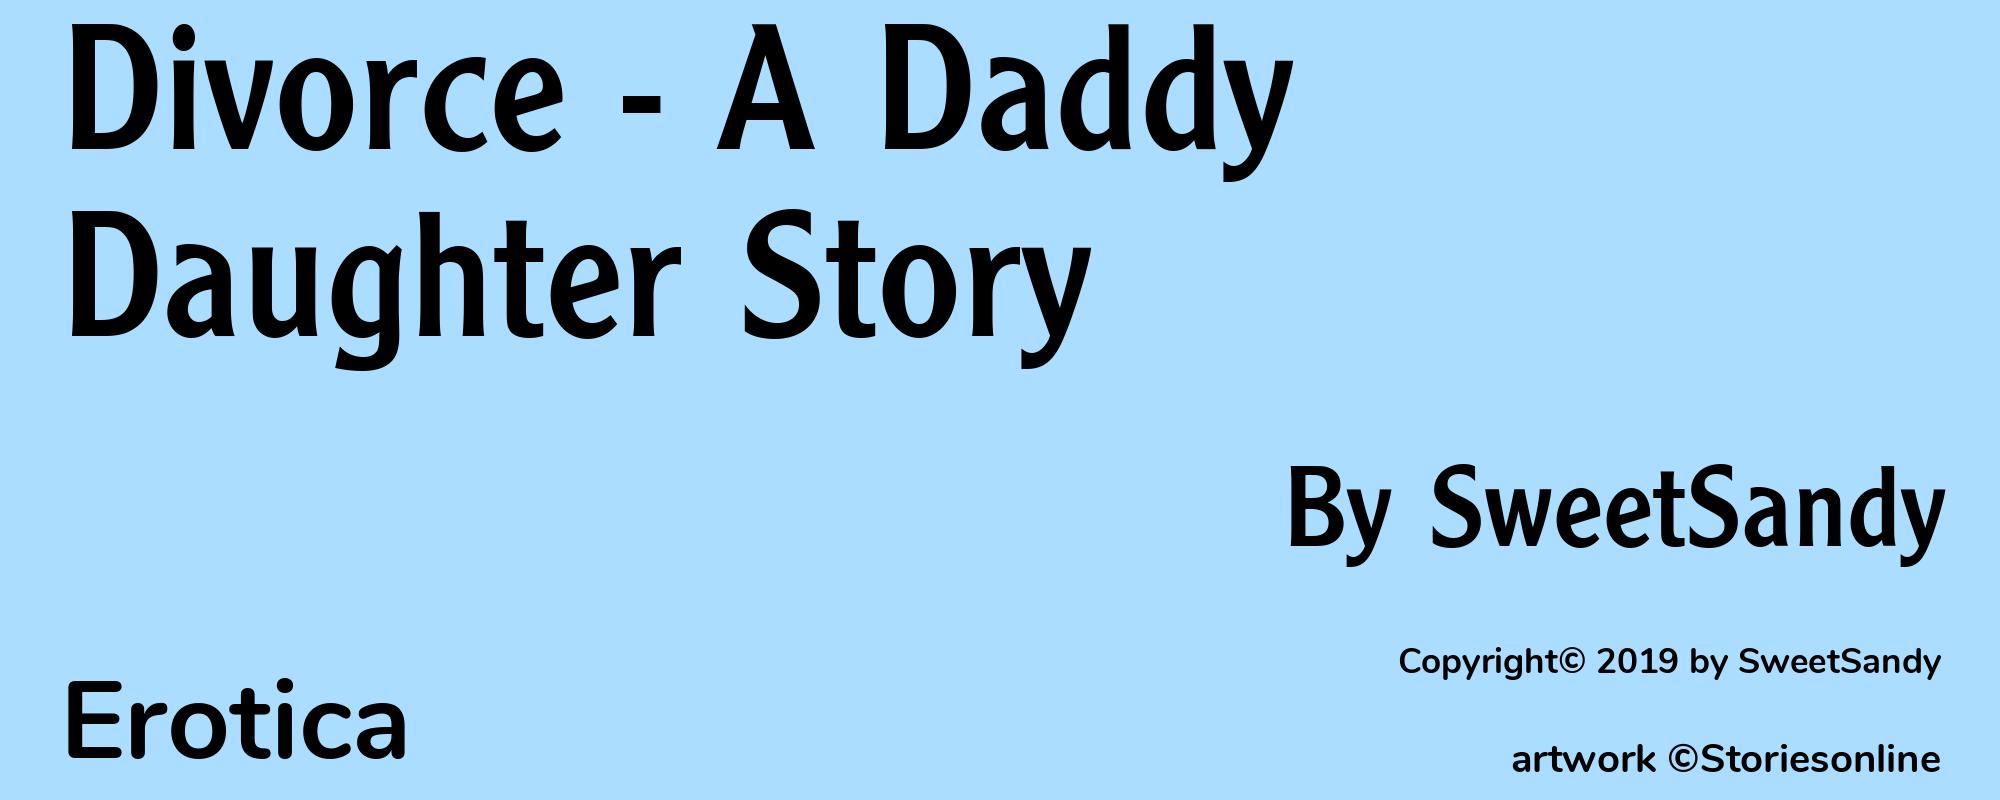 Divorce - A Daddy Daughter Story - Cover